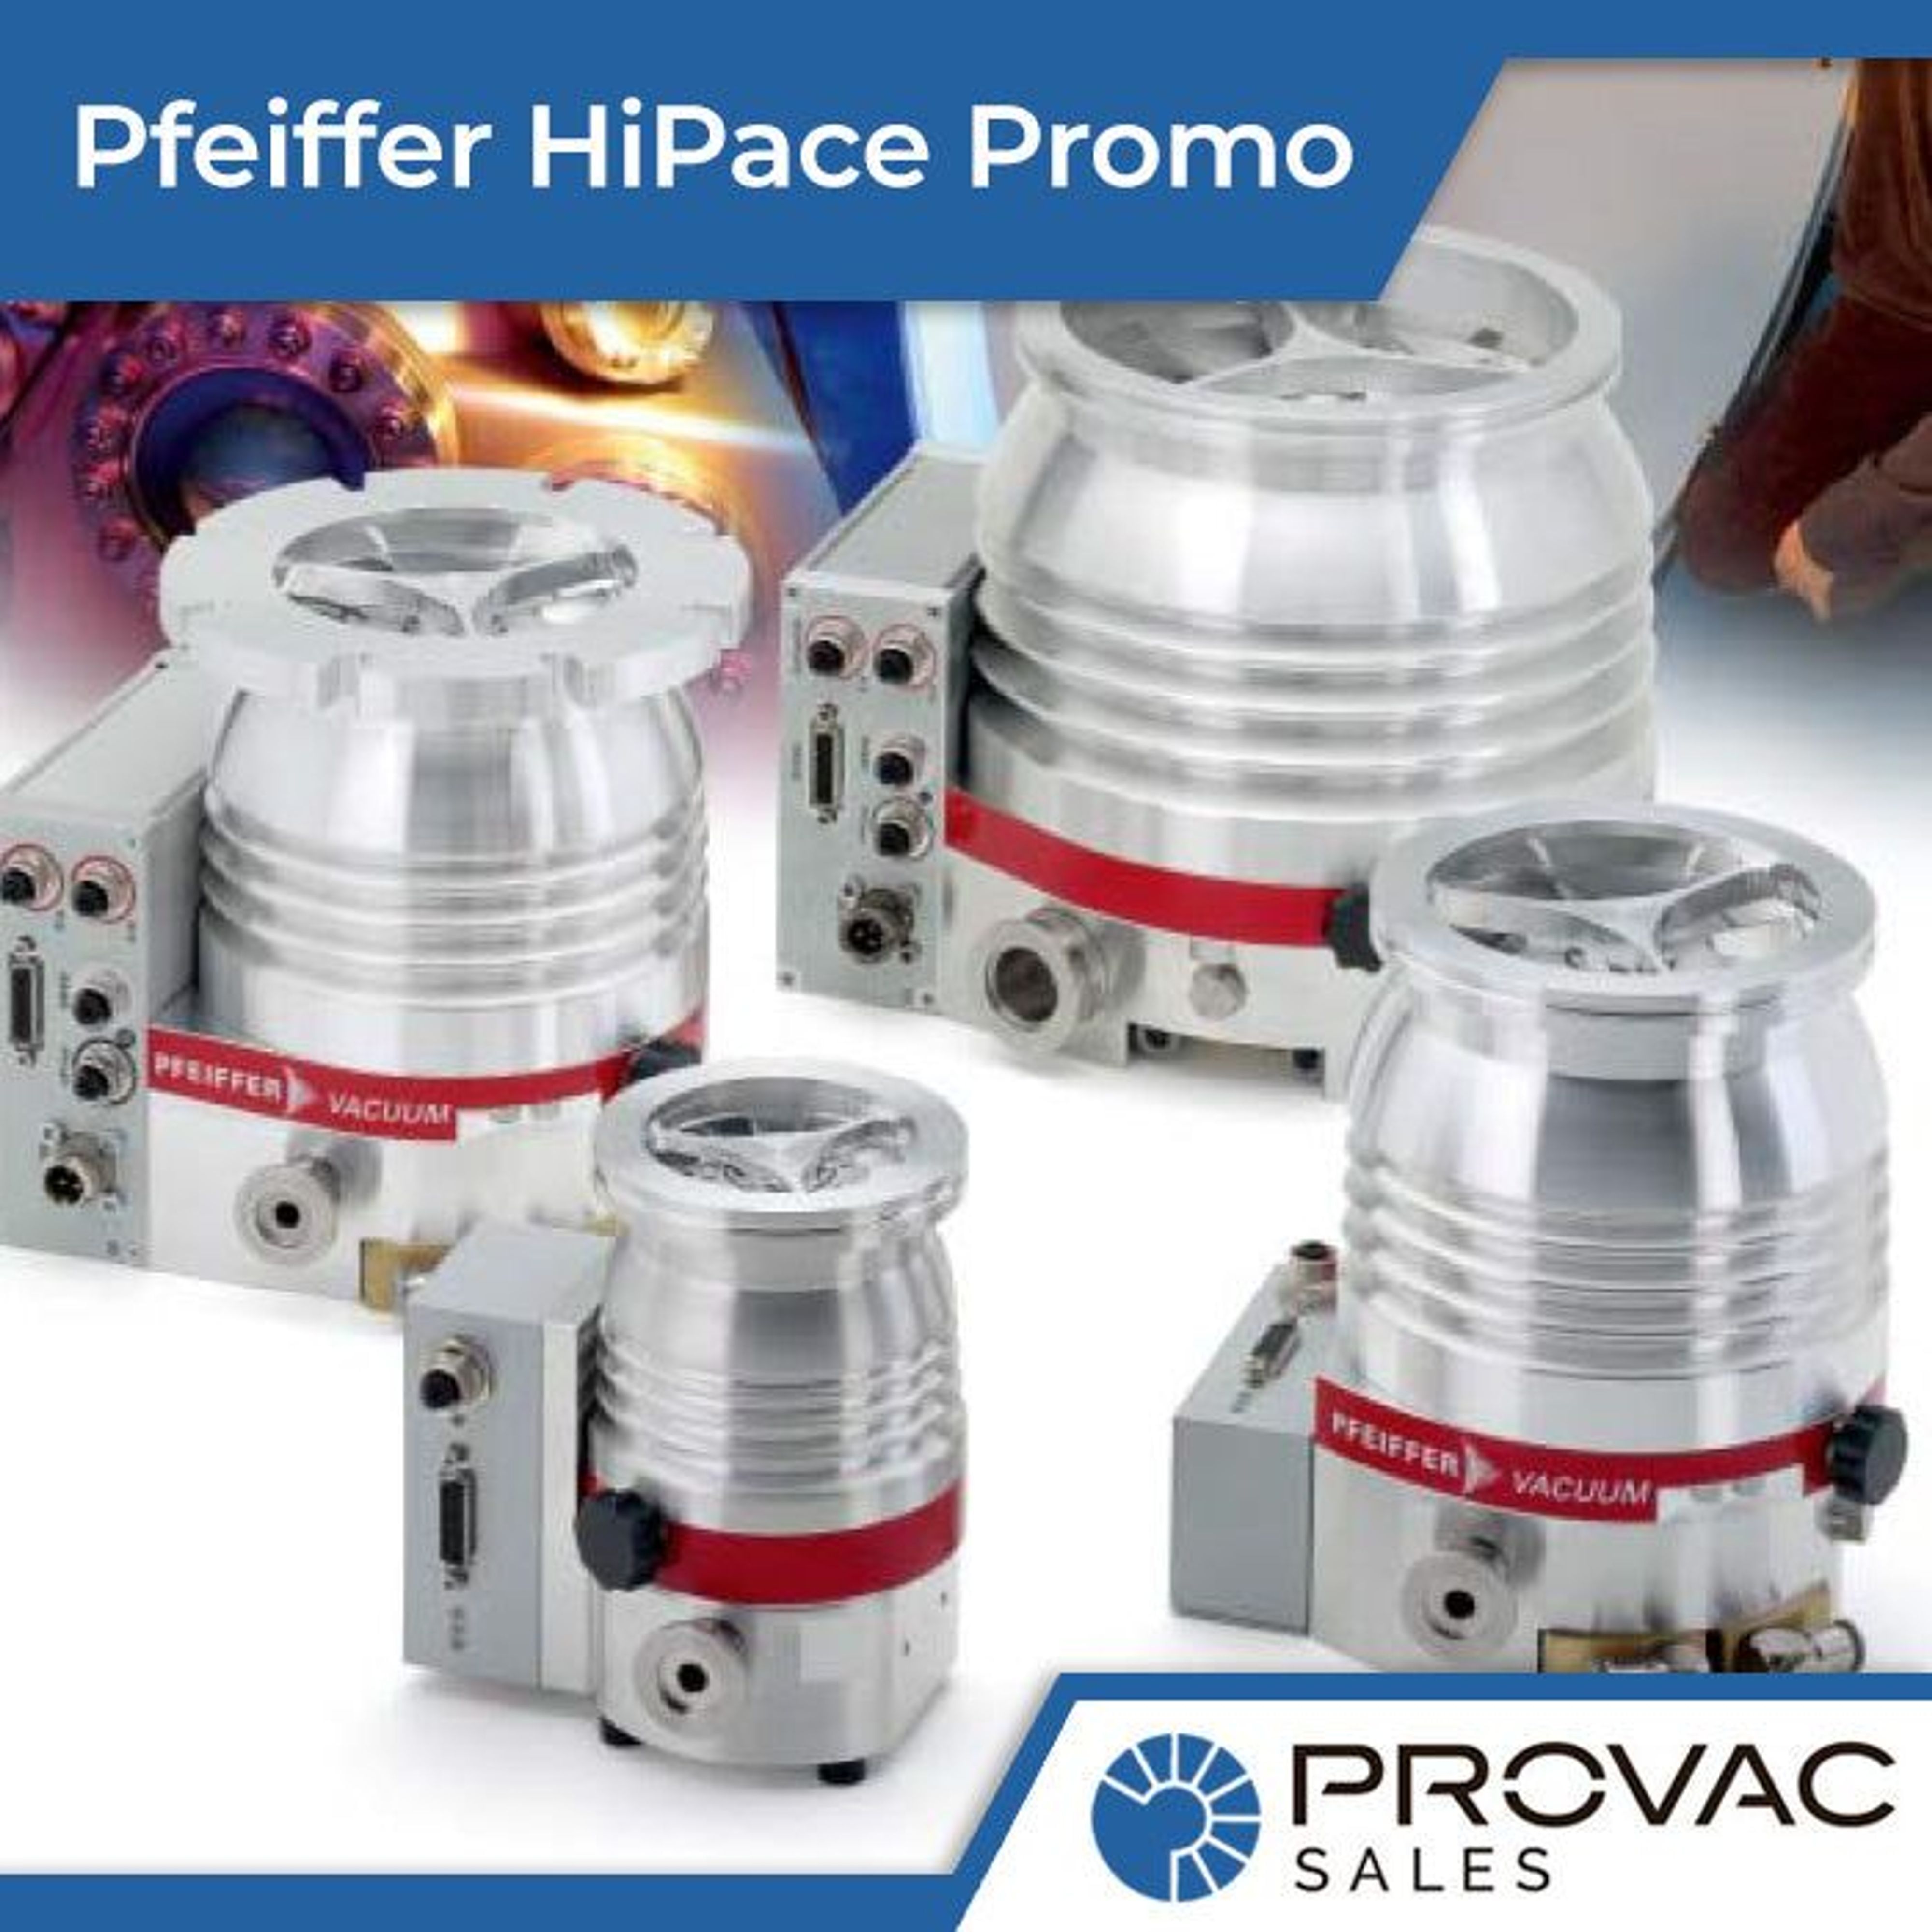 *Special Promotion* Pfeiffer HiPace Turbo Pumps: Select Models Background